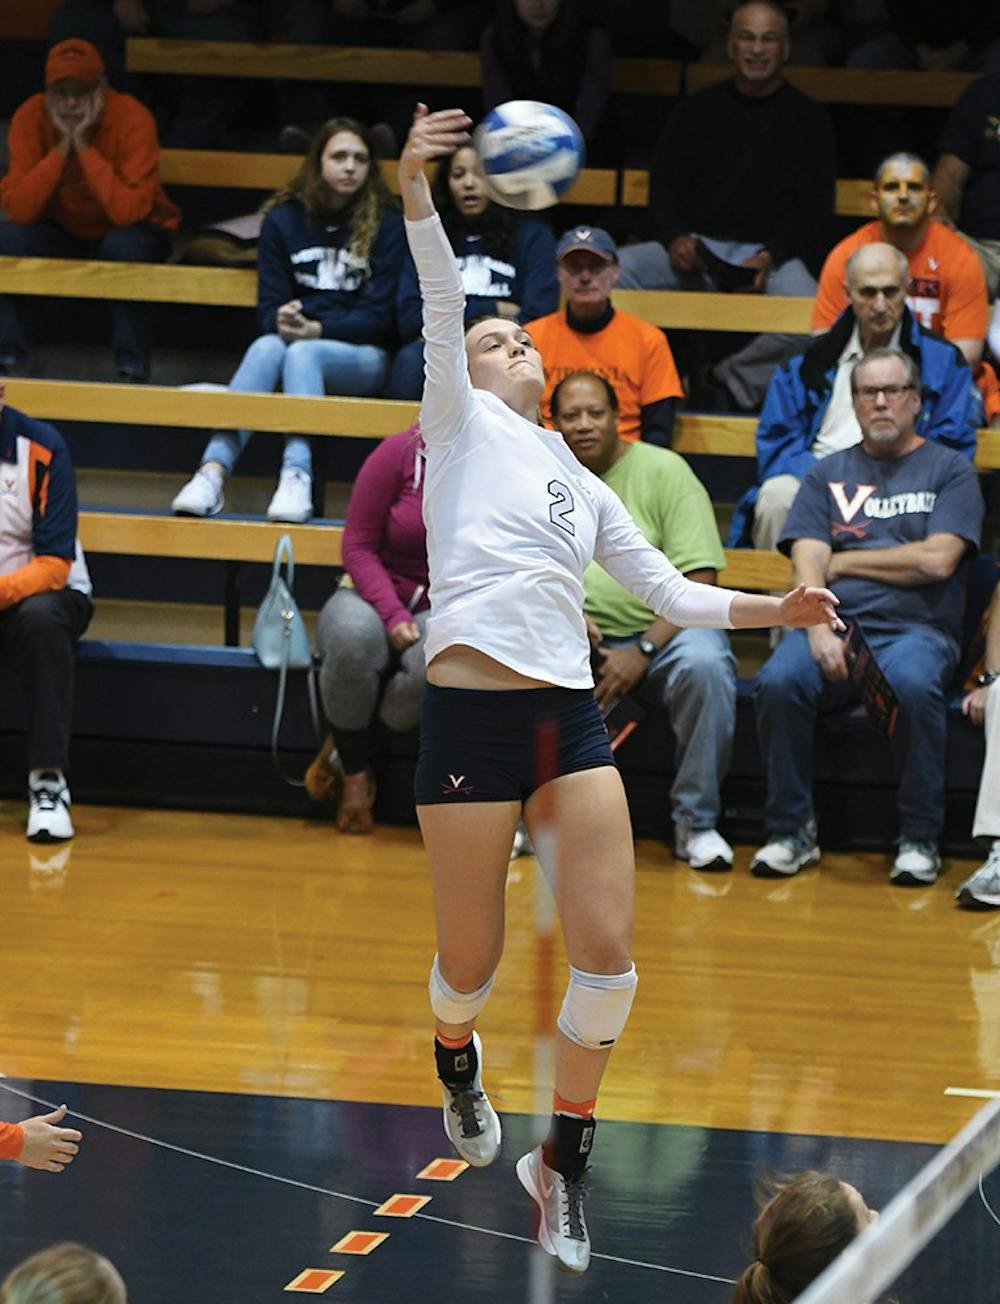 <p>Senior outside hitter lead the Cavaliers with 11 kills&nbsp;in Friday's matchup against No. 12 Florida State, but her efforts were insufficient to secure victory.&nbsp;</p>